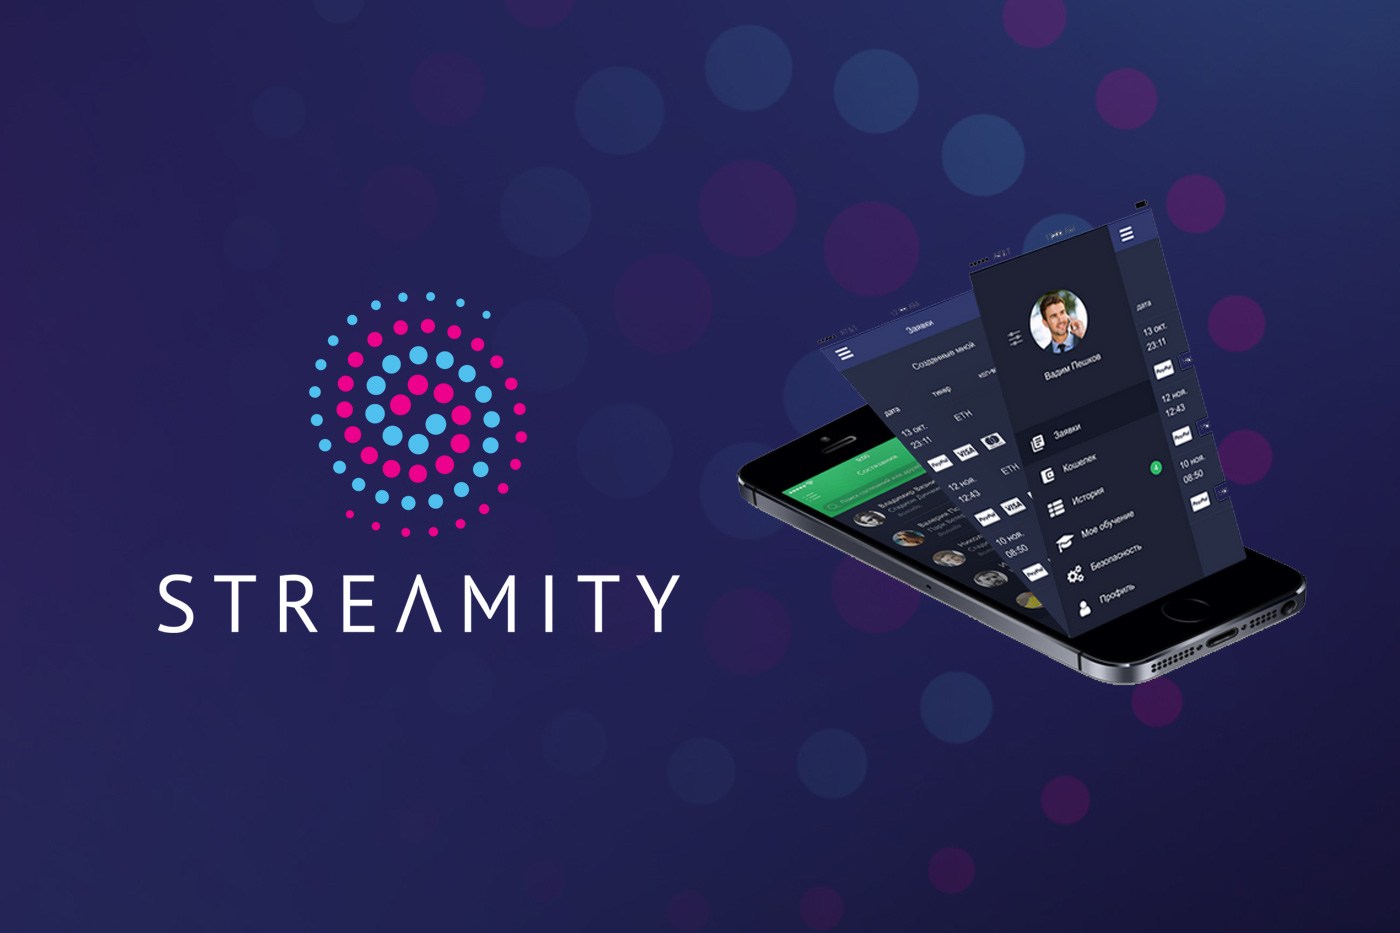 streamity-first-decentralized-cryptocurrency-exchange-ico.jpg